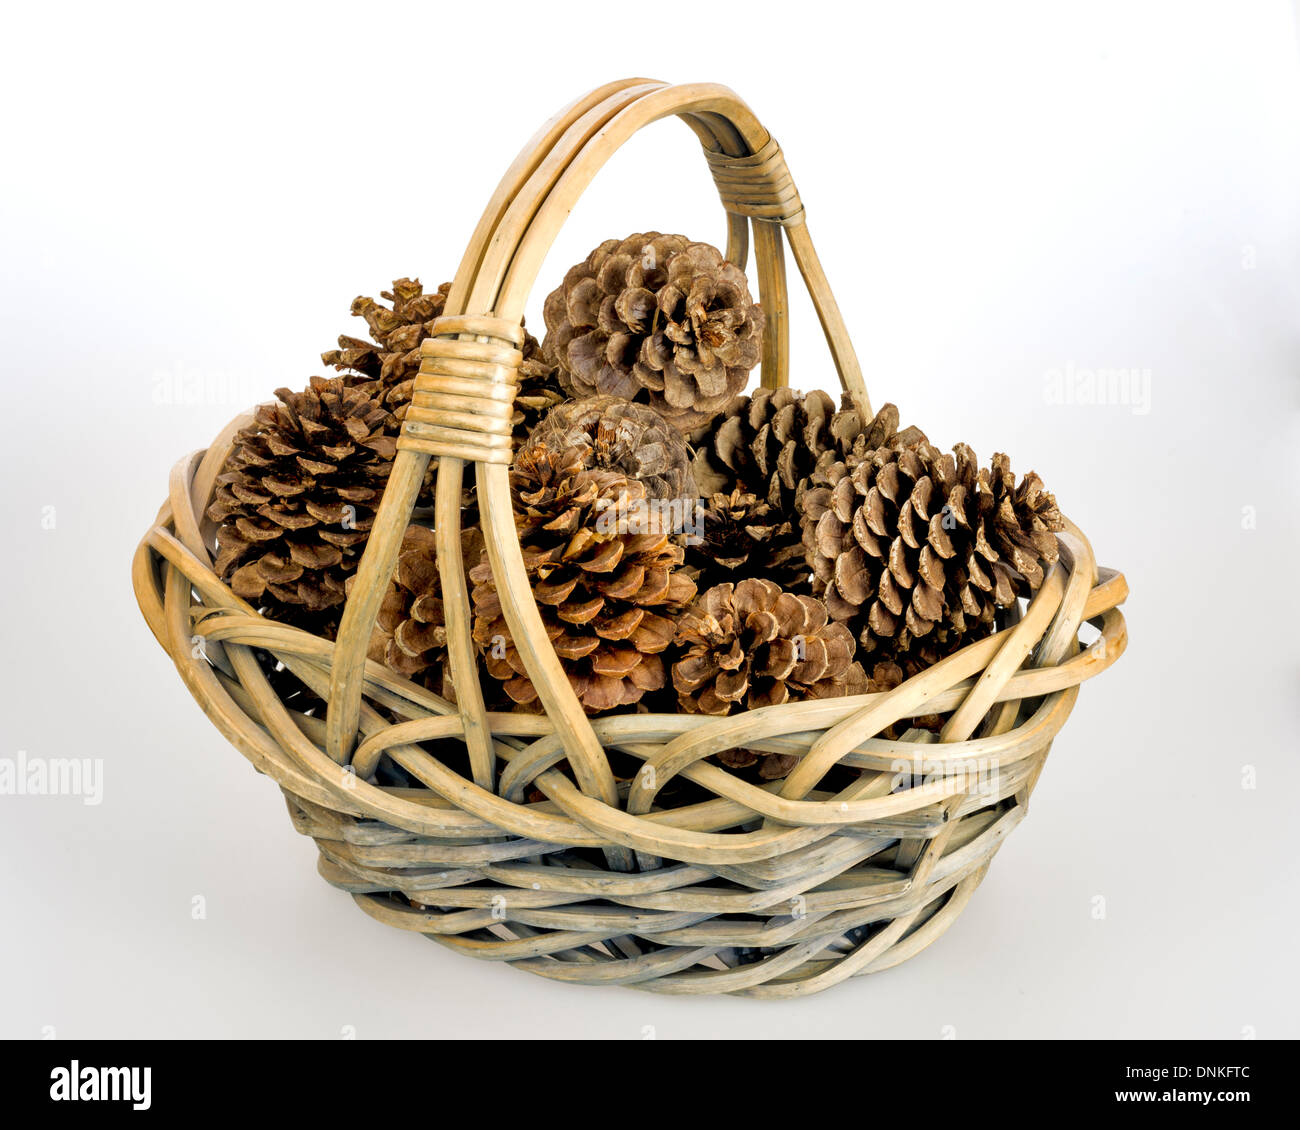 Natural pine cones arranged in a basket Stock Photo